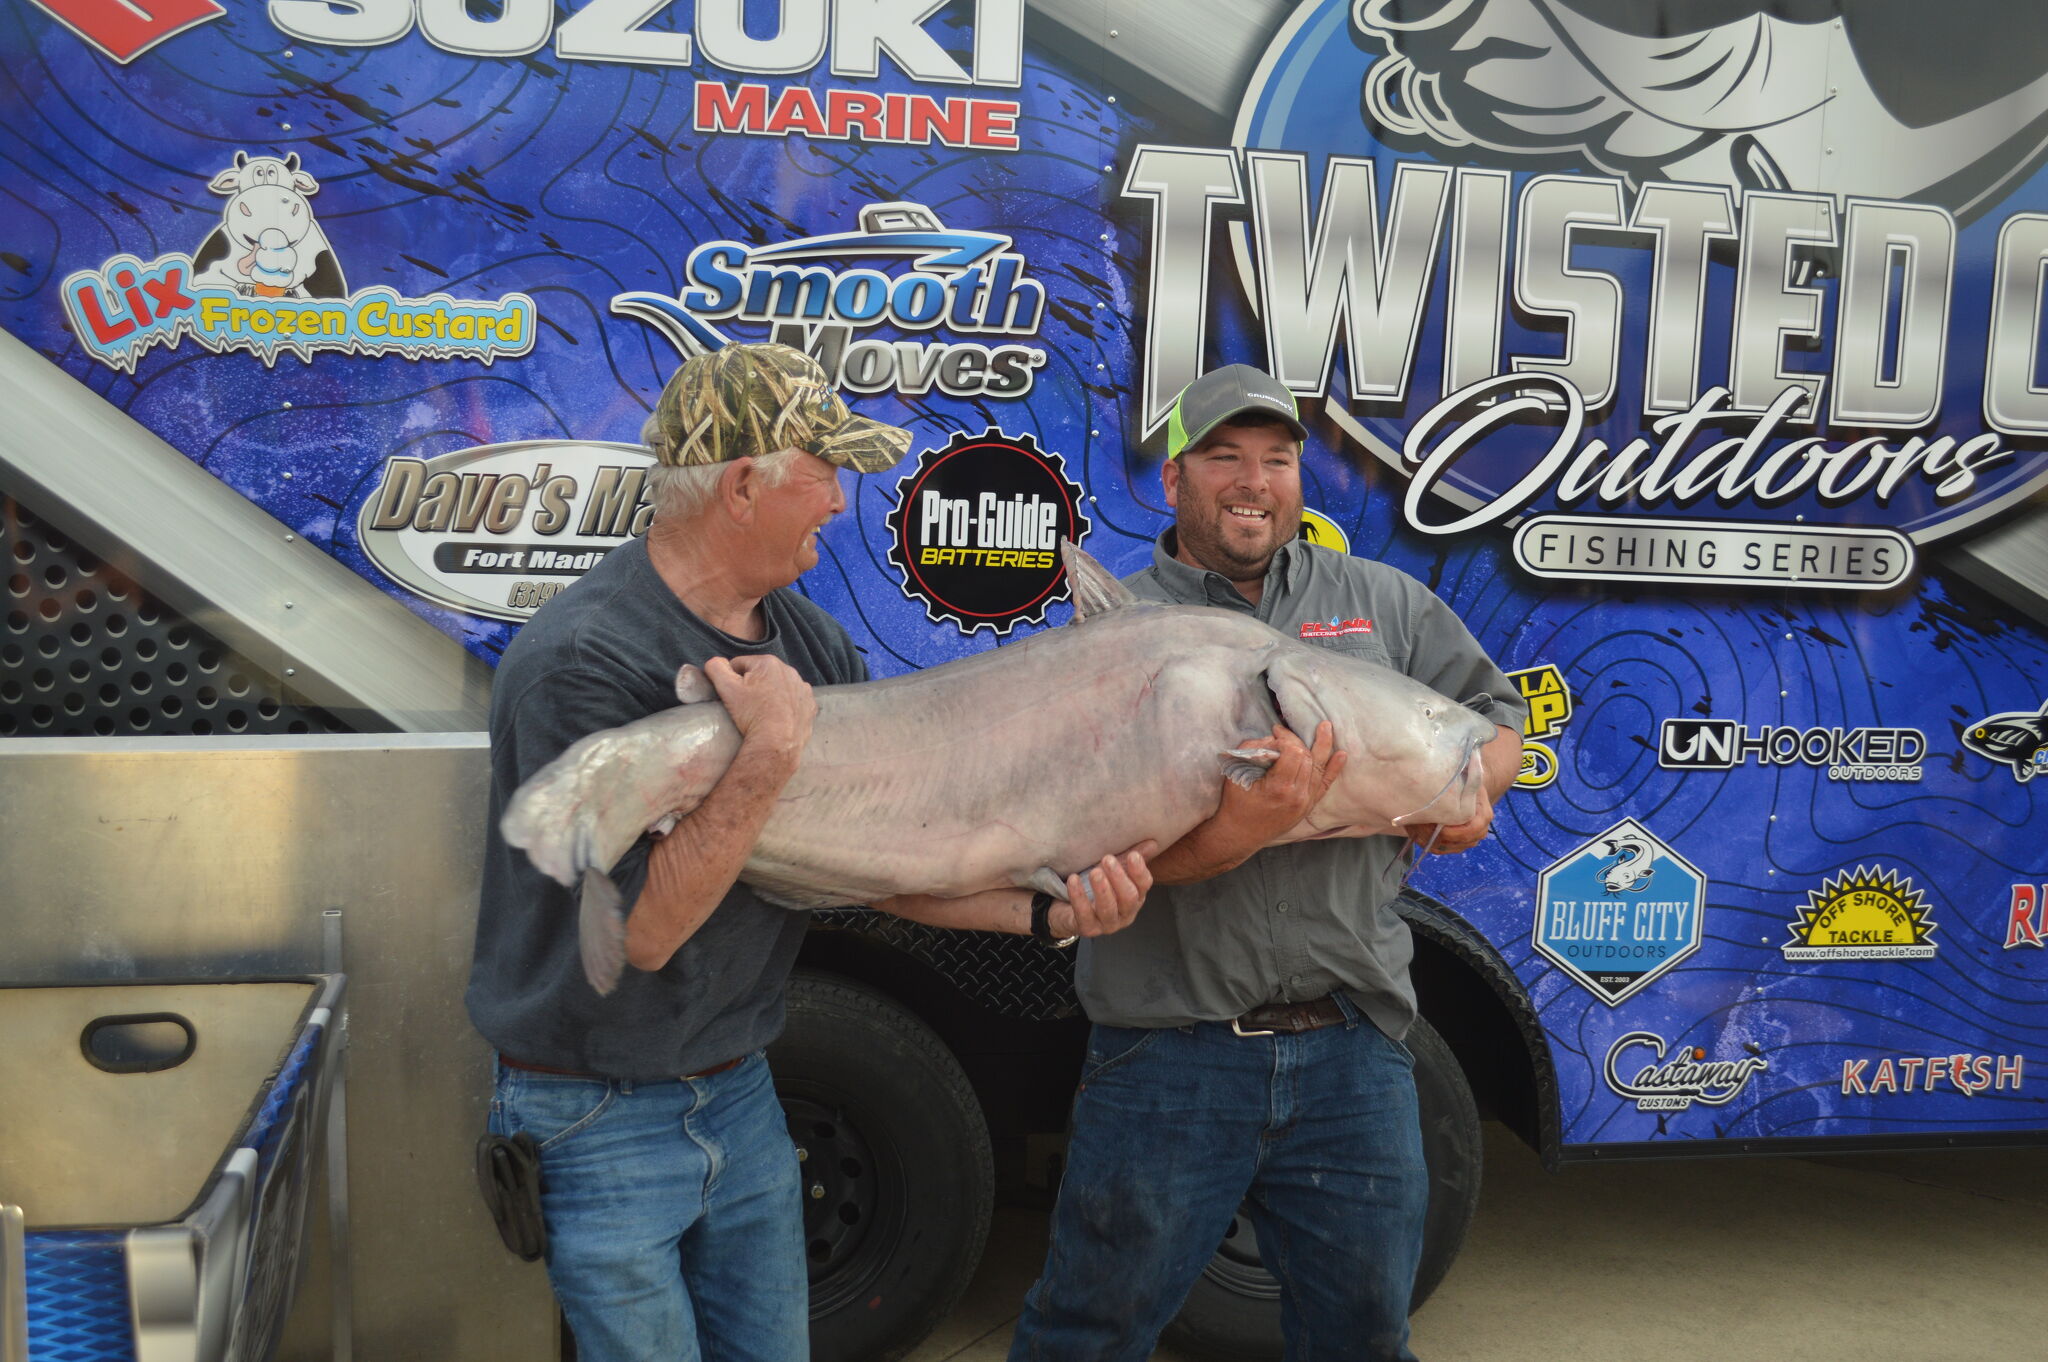 Catfish anglers happy with Alton event